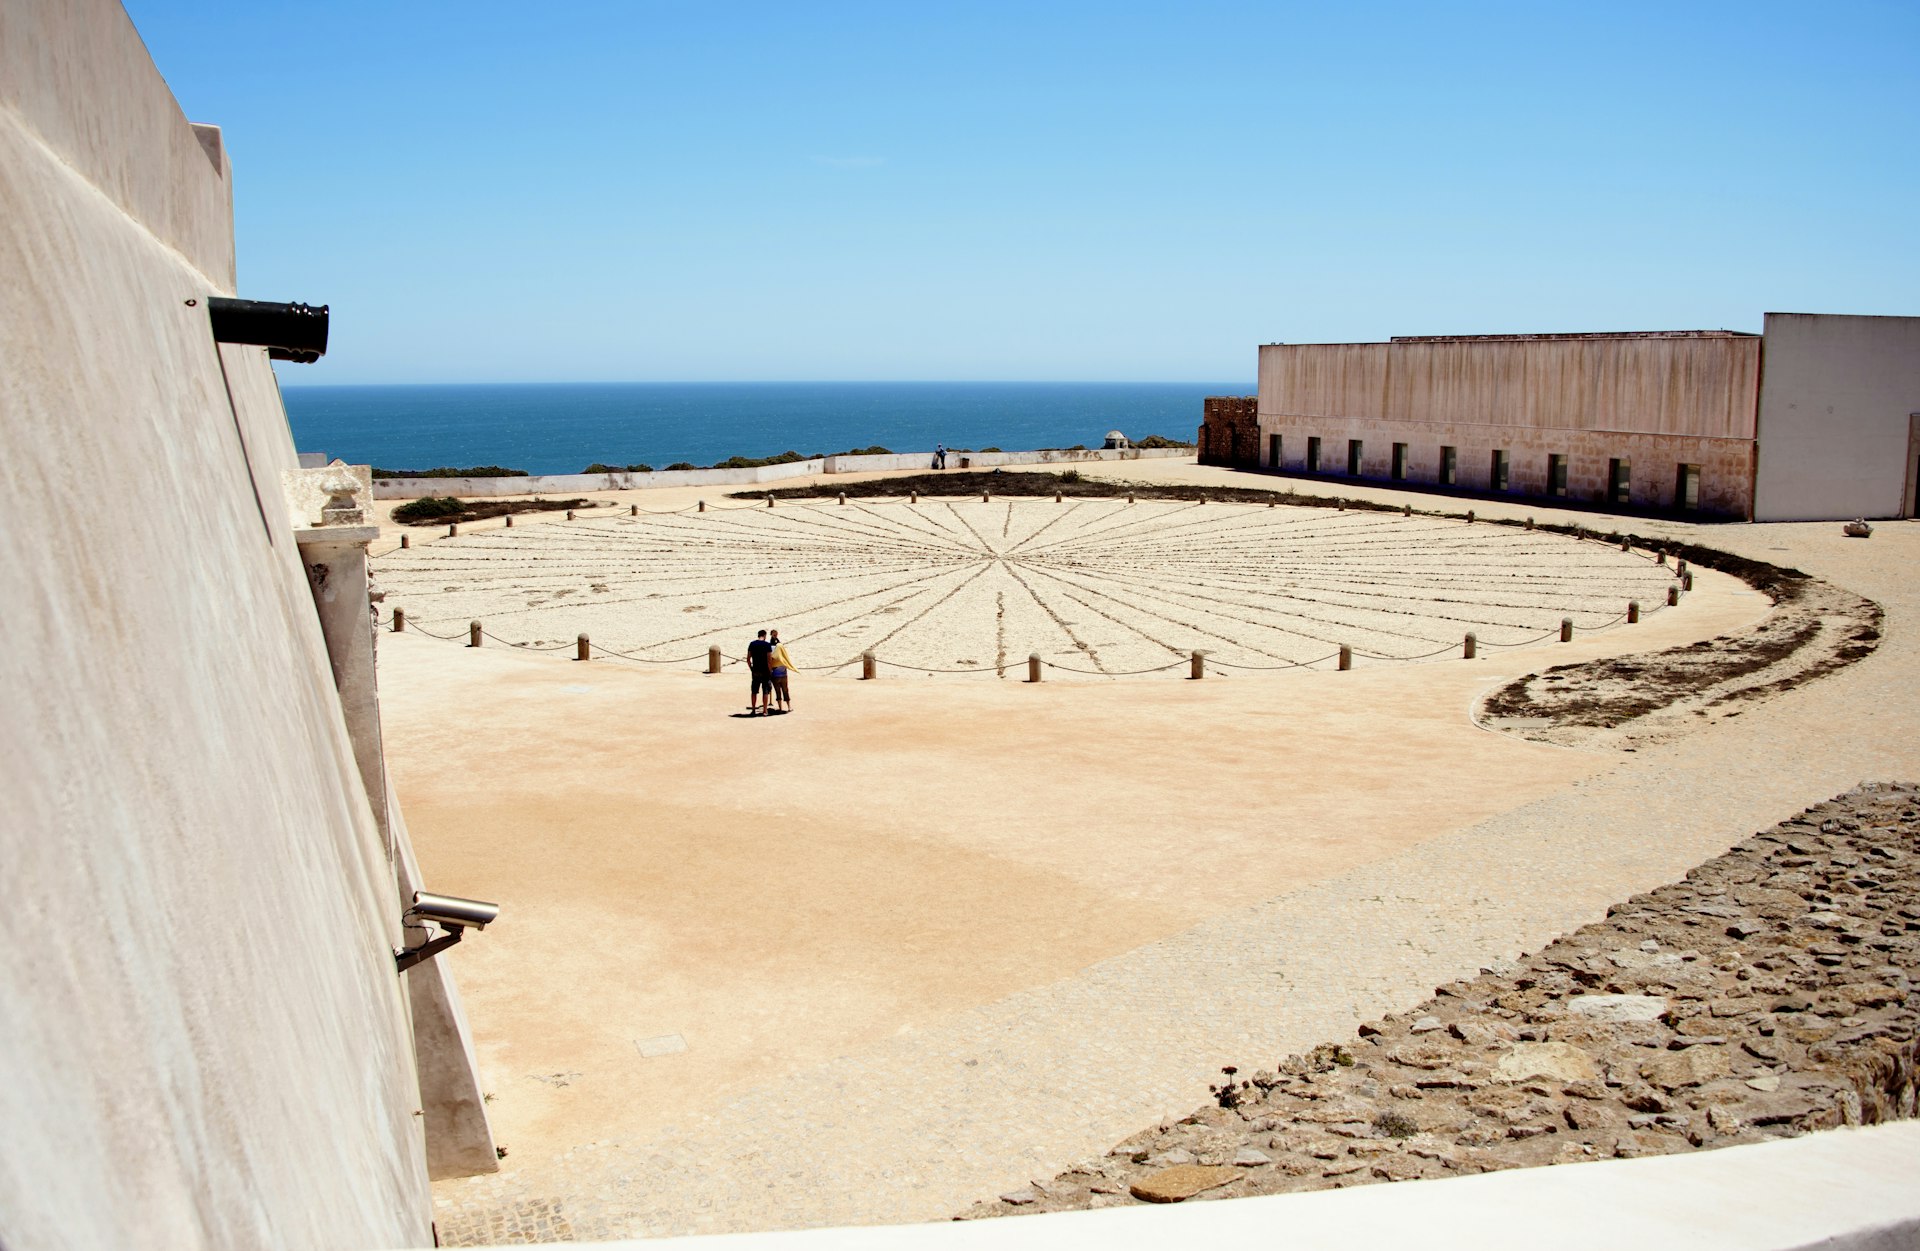 Visitors look at a large compass rose etched into the ground at the Fortaleza de Sagres